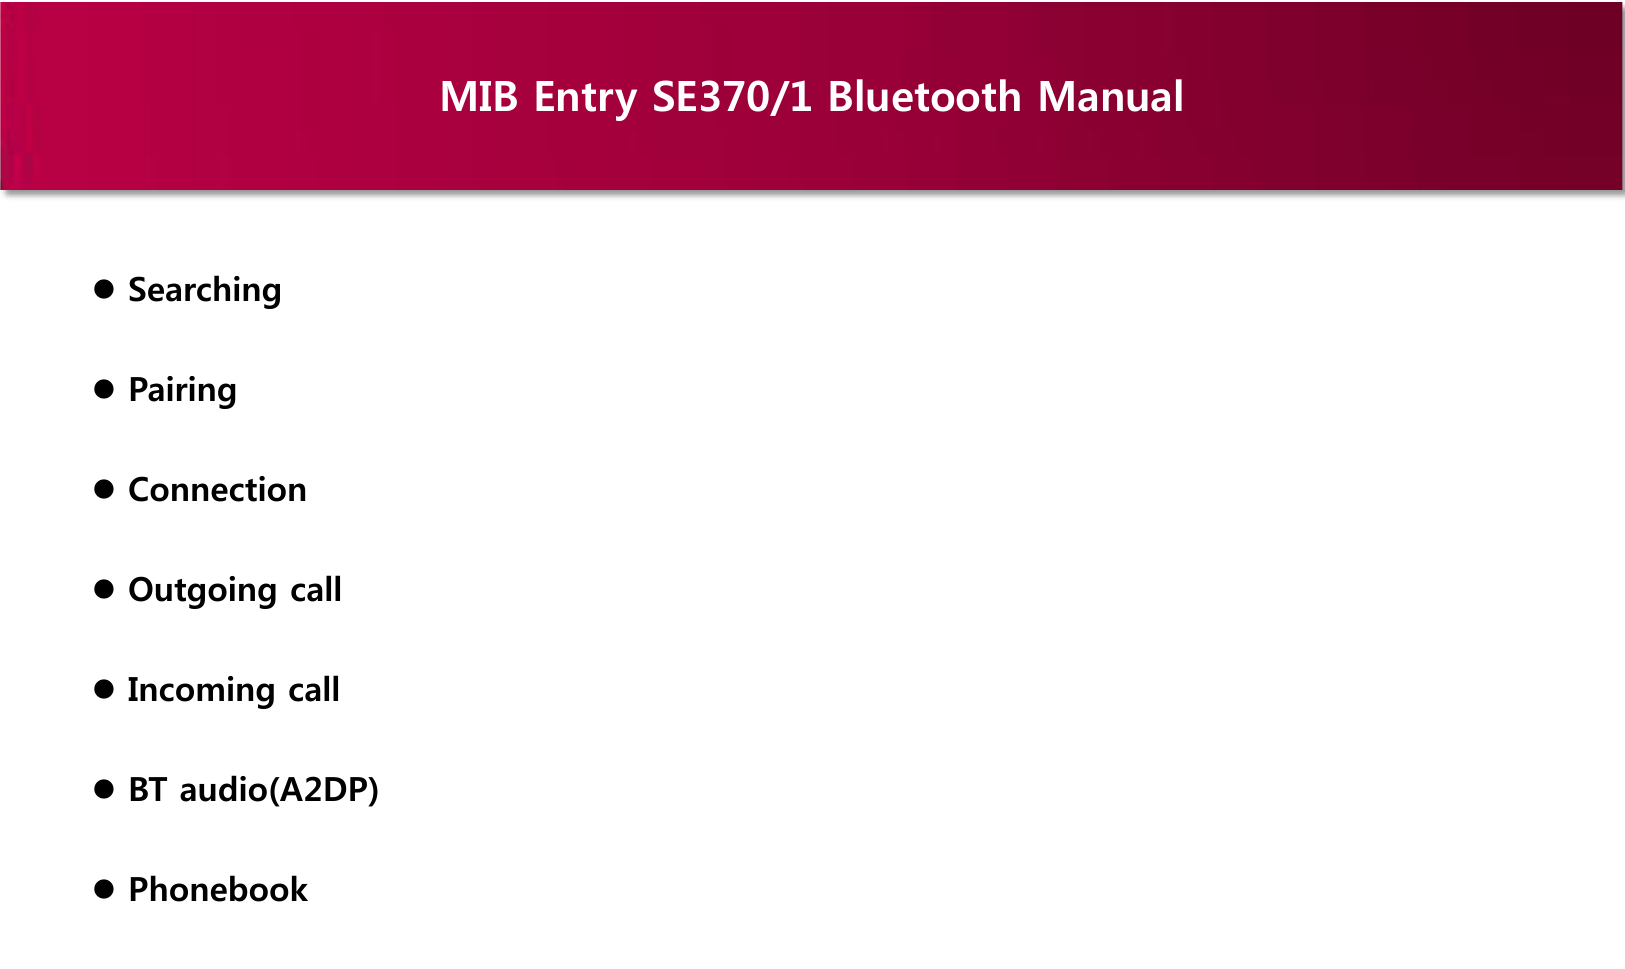 MIB Entry SE370/1 Bluetooth Manual  Searching  Pairing  Connection  Outgoing call  Incoming call  BT audio(A2DP)  Phonebook 